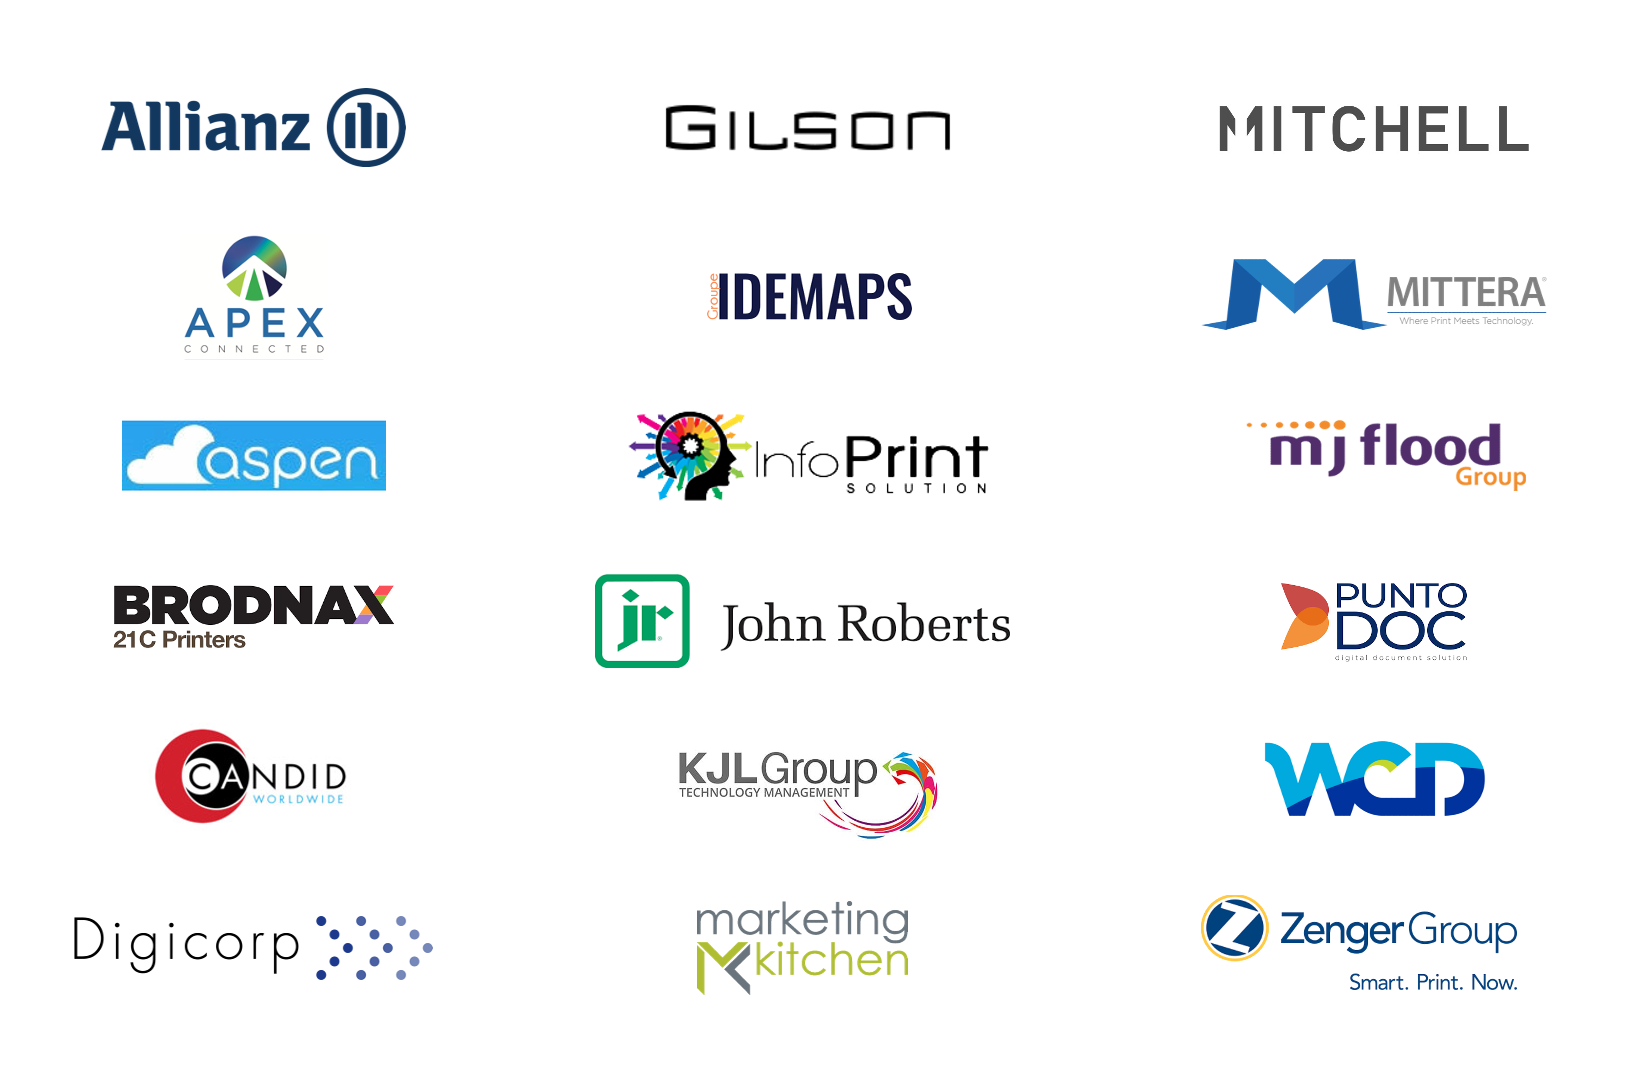 Welcome to our new PrintReleaf Partners!